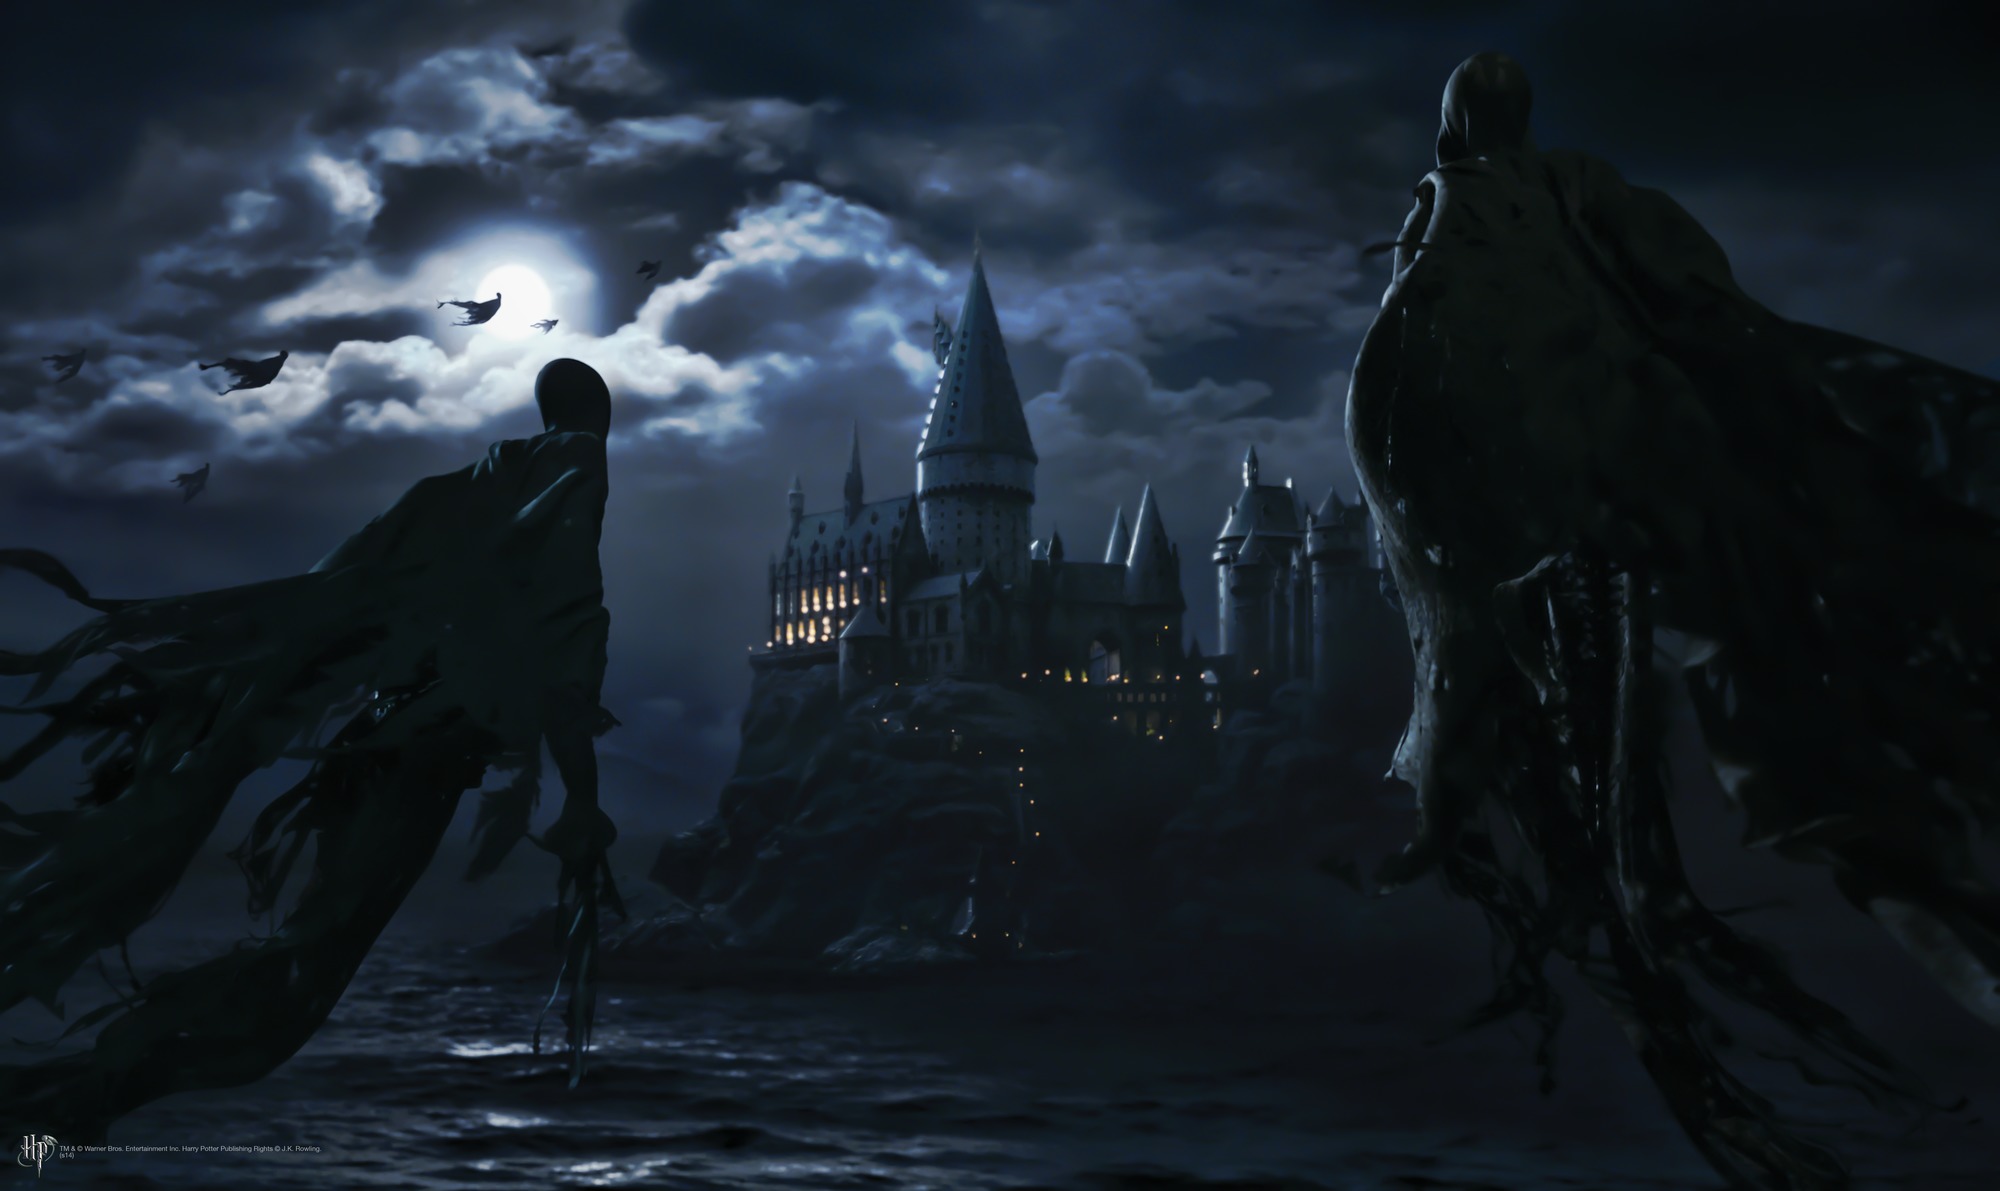 The Dementors are meant to symbolize Major Depressive Disorder